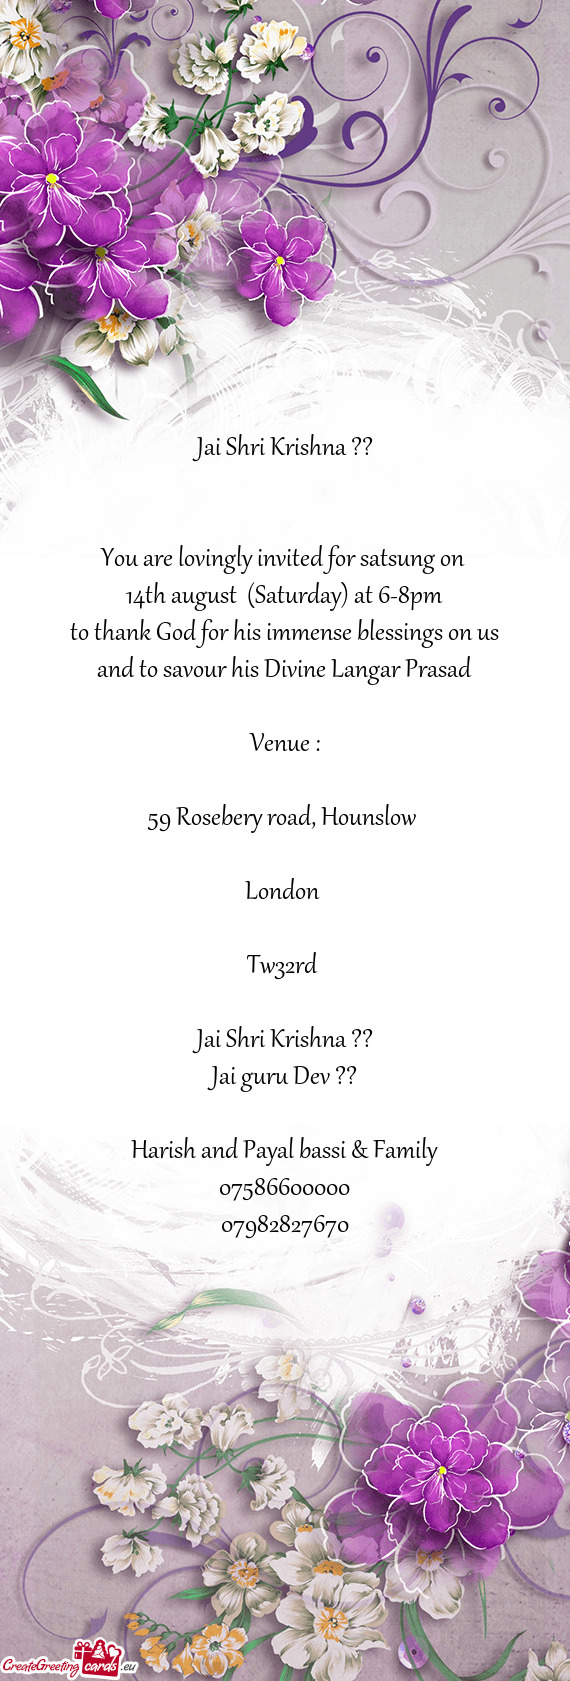 14th august (Saturday) at 6-8pm